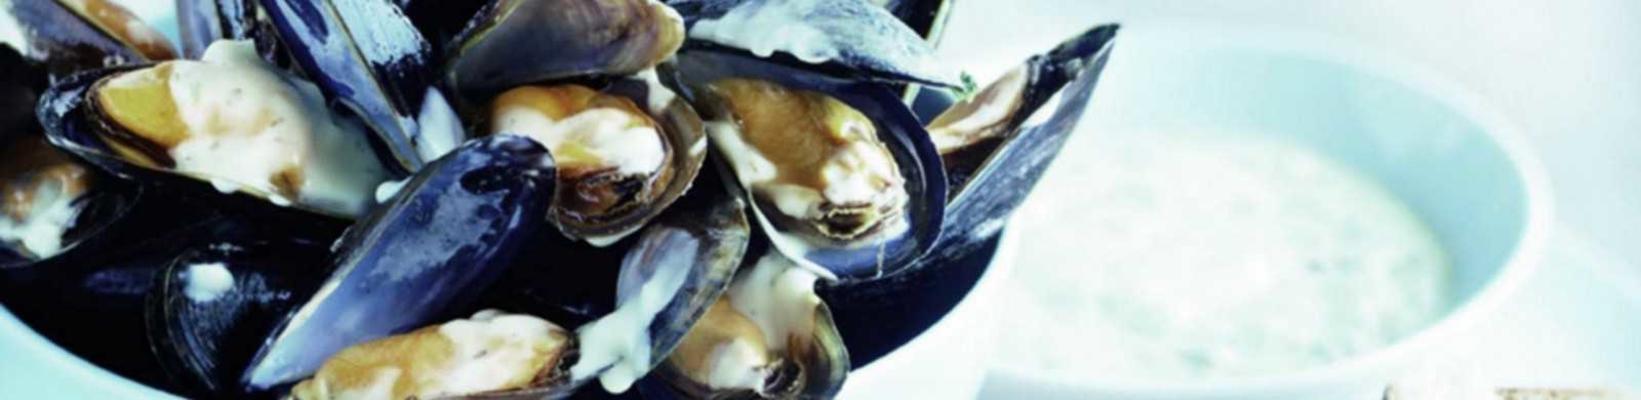 mussels with ravigote sauce